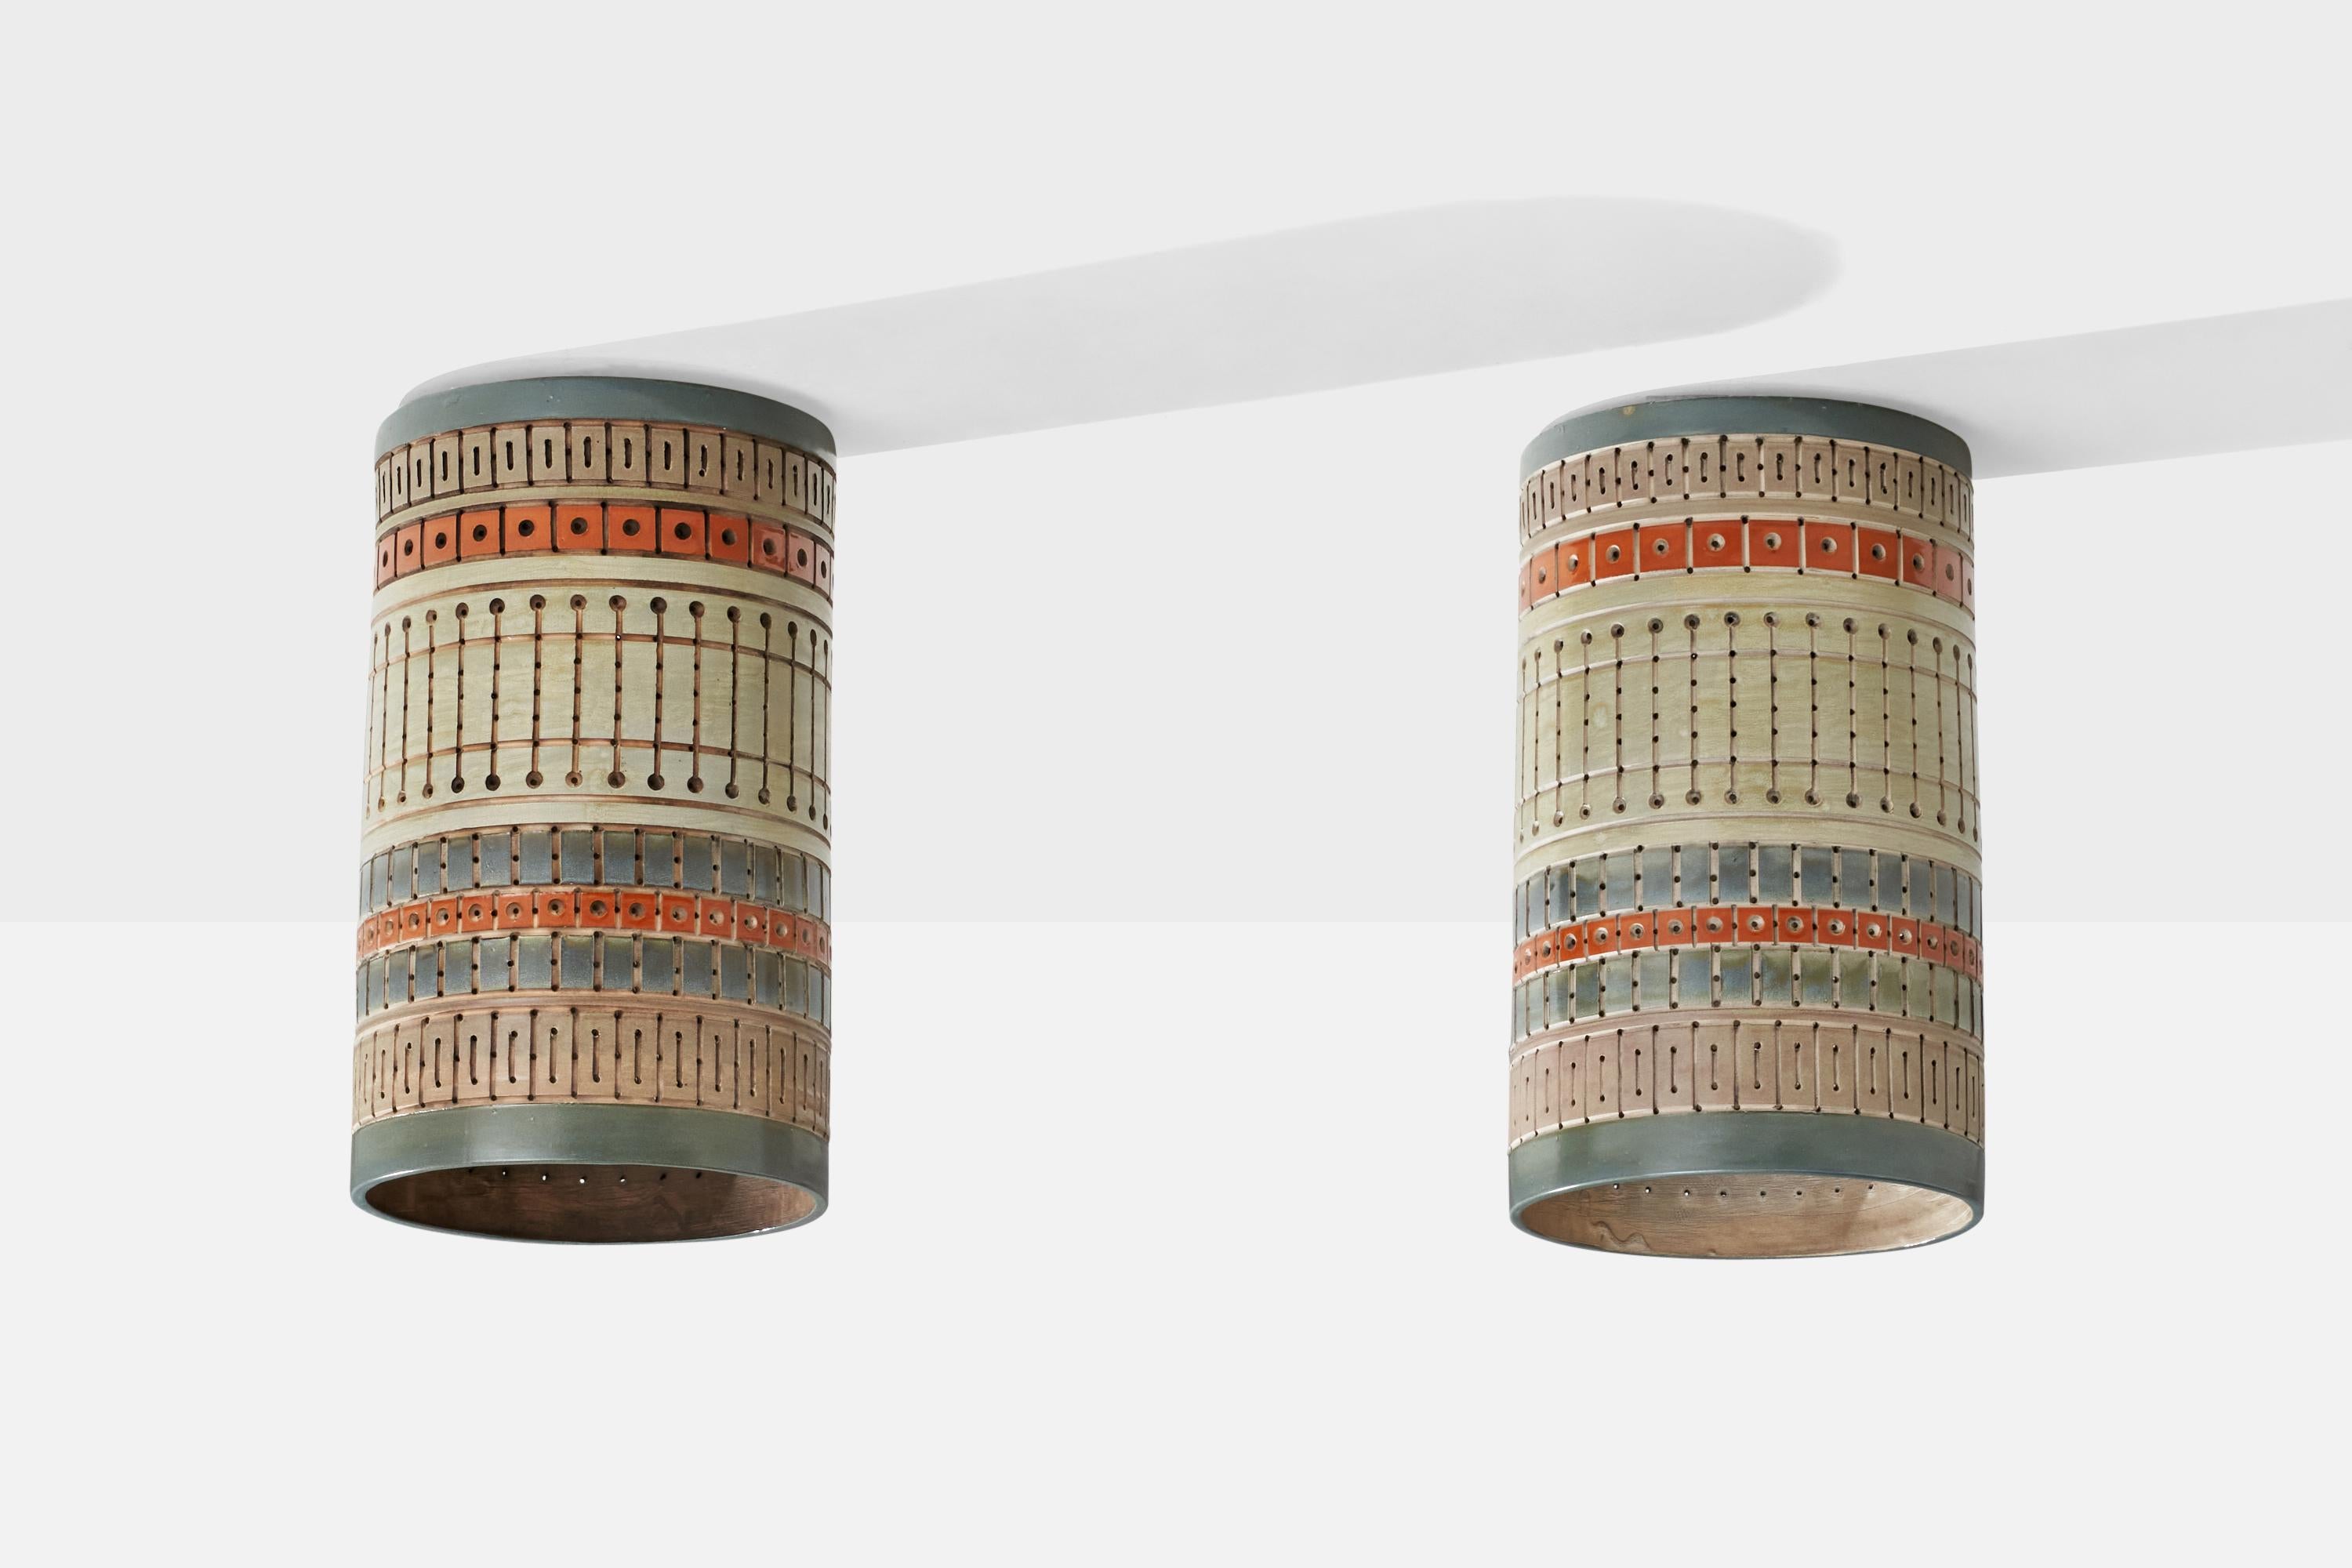 A pair of hand-painted yellow, red and blue ceramic flush mounts or pendant lights, designed and produced by Martha & Beaumont Mood, San Antonio, Texas, USA, 1970s.

Overall Dimensions (inches): 18.25H x 10.75” D
Back Plate Dimensions (inches):